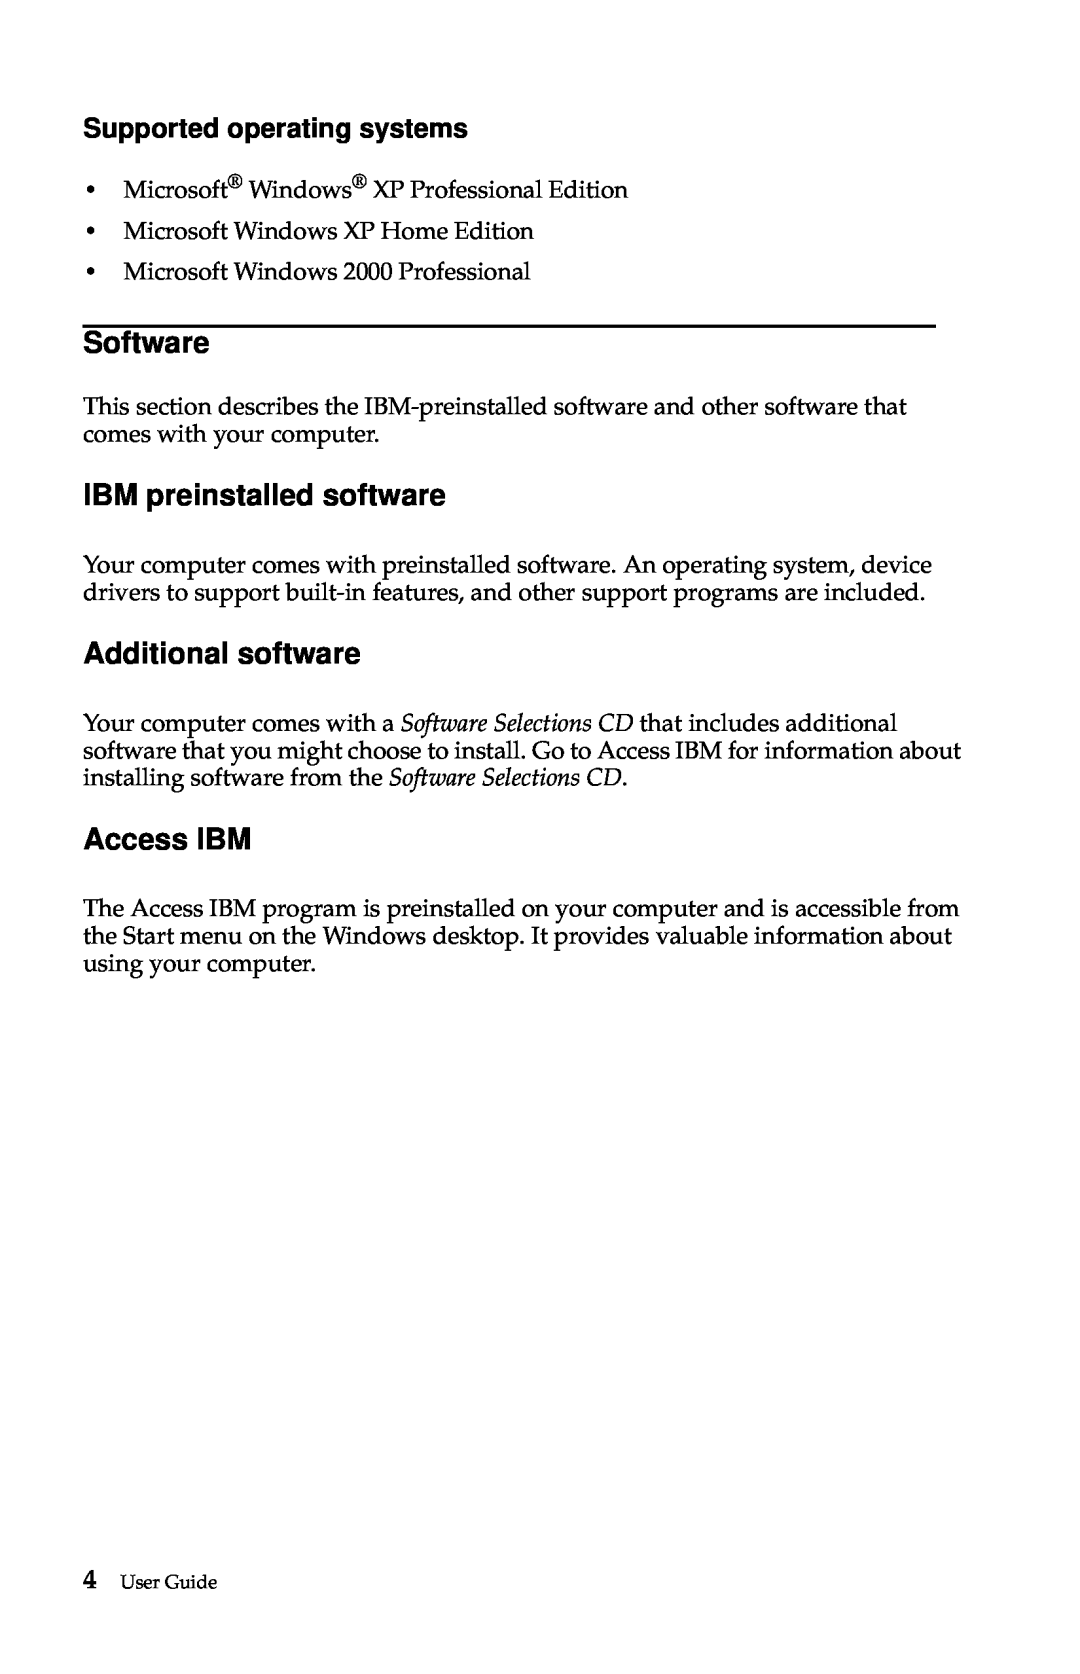 IBM 6274, 2283 manual Software, IBM preinstalled software, Additional software, Access IBM, Supported operating systems 